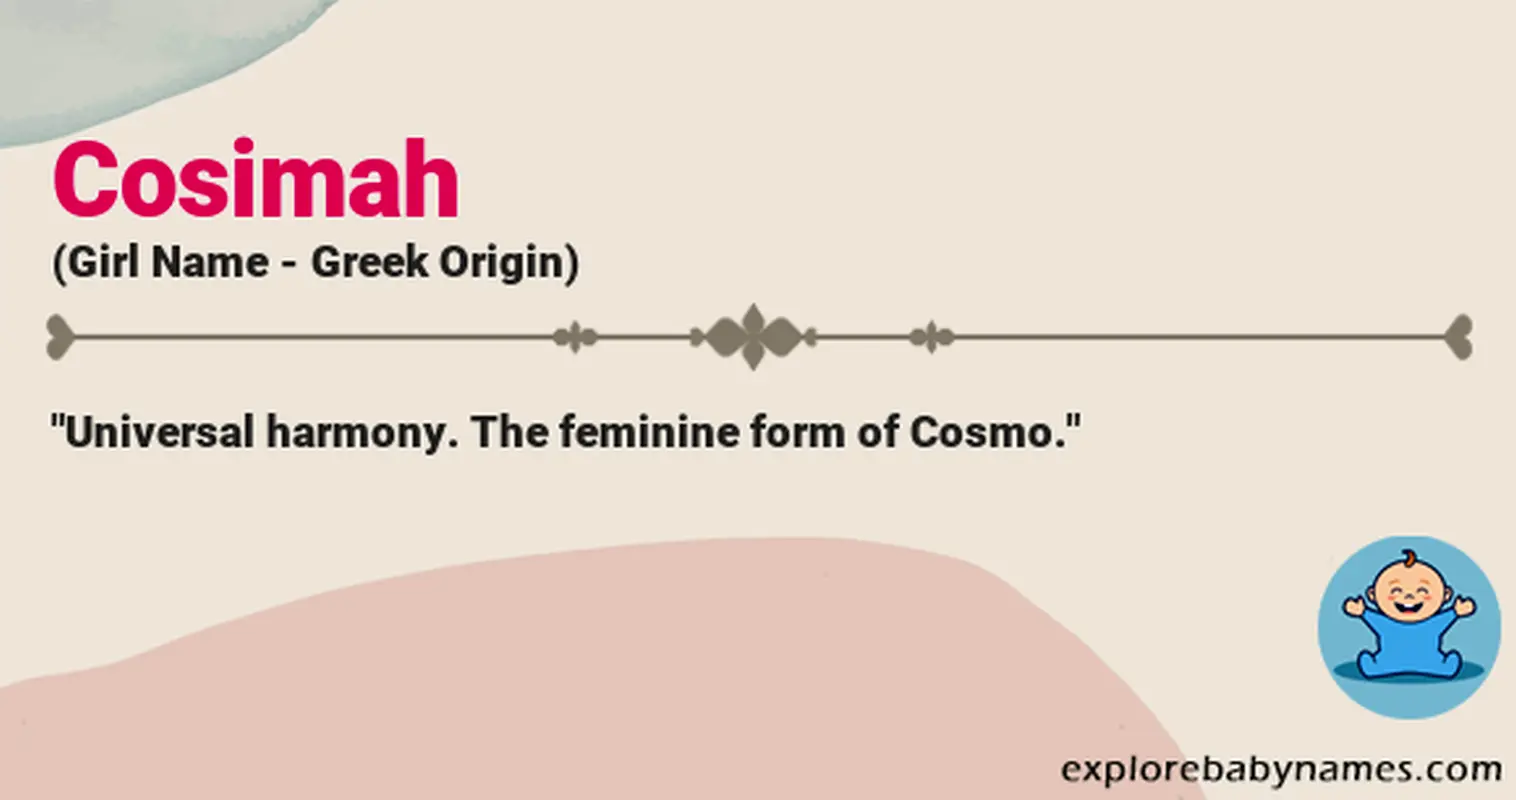 Meaning of Cosimah